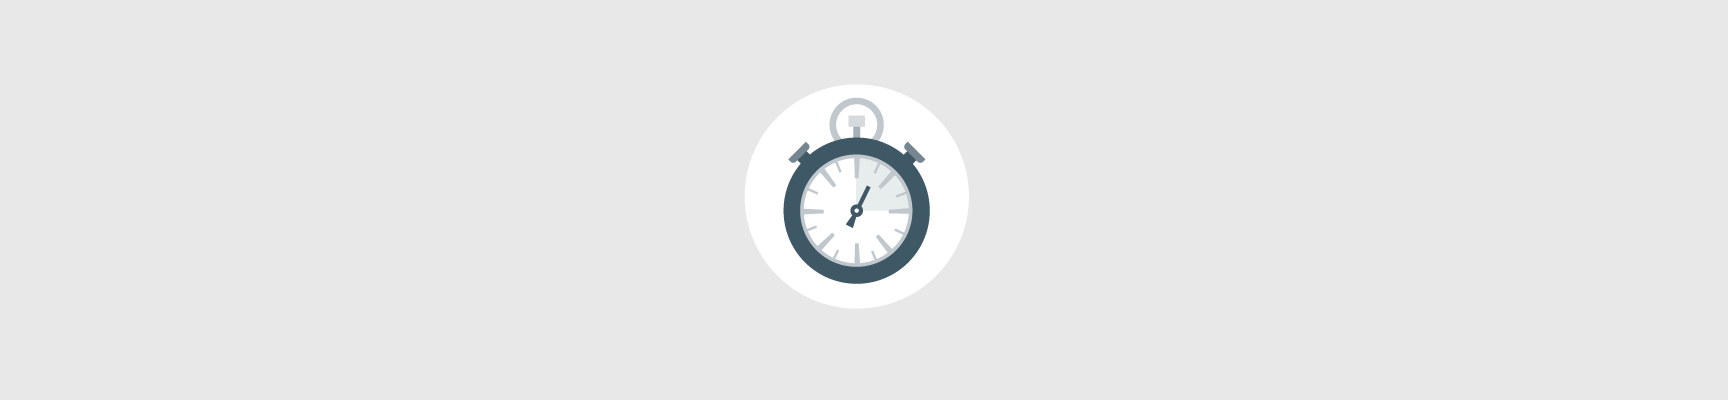 Stopwatch icon on a light grey background